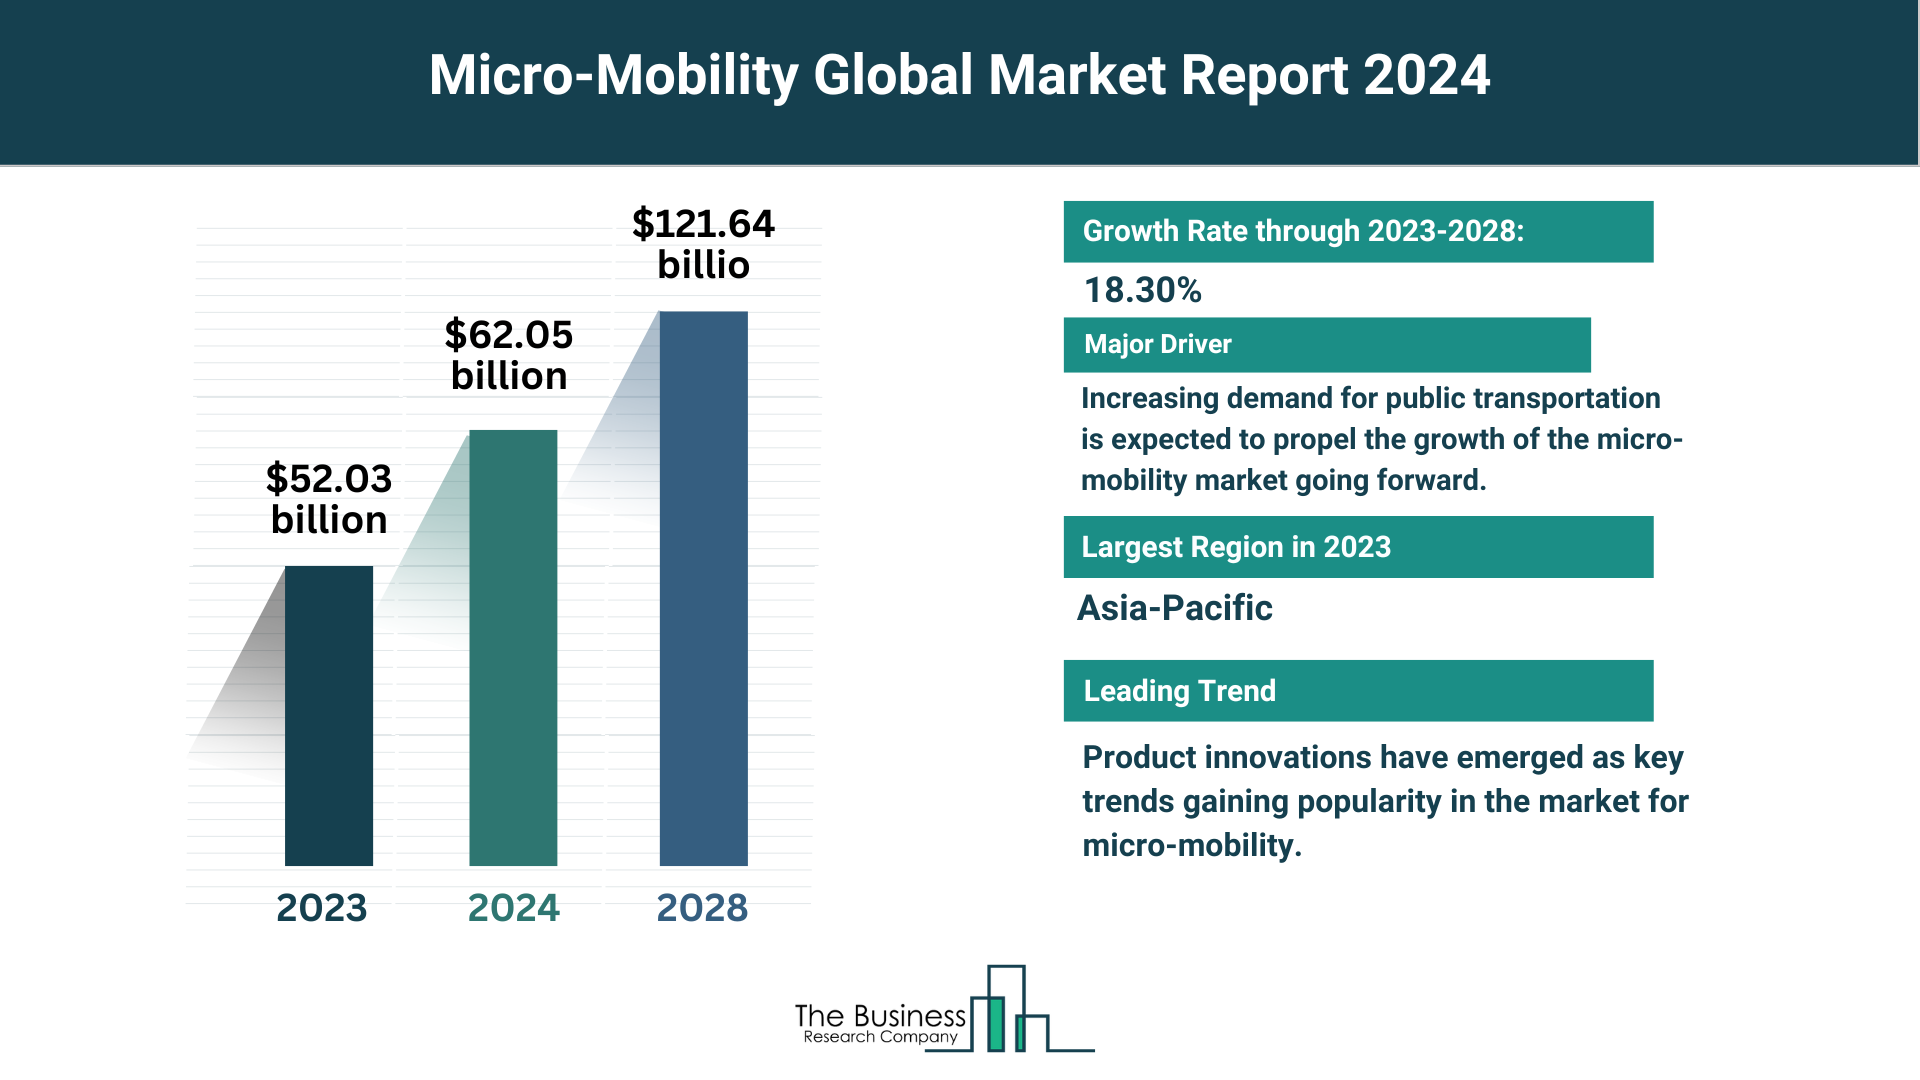 Global Micro-Mobility Market Report 2024: Size, Drivers, And Top Segments